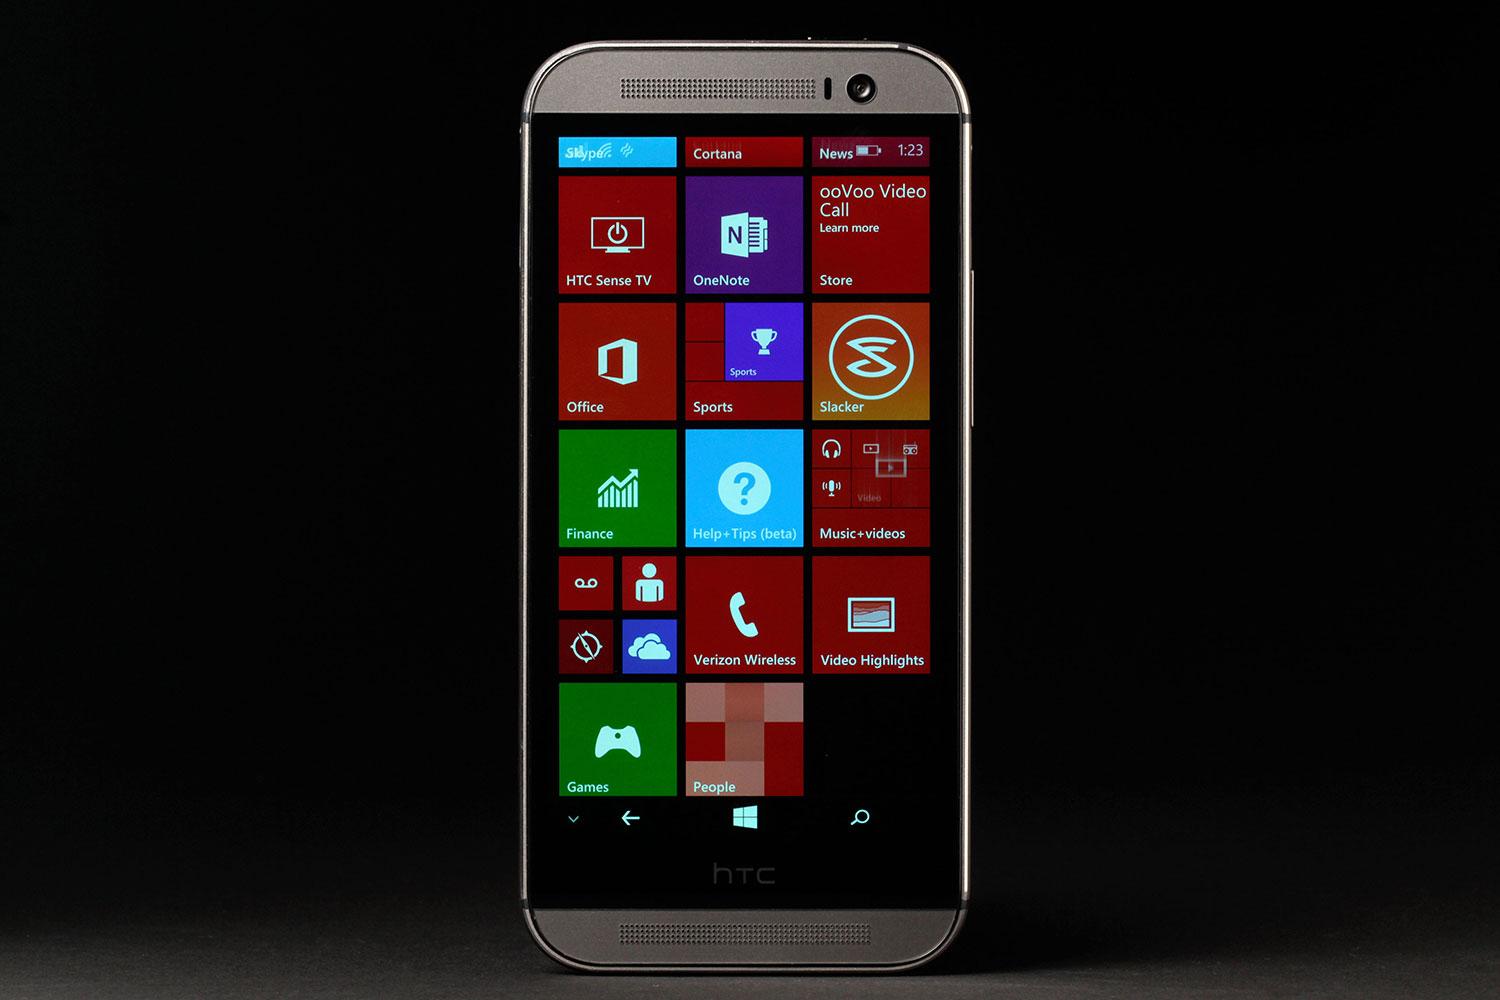 HTC One Windows Phone Review: The Windows Phone flagship | Digital Trends